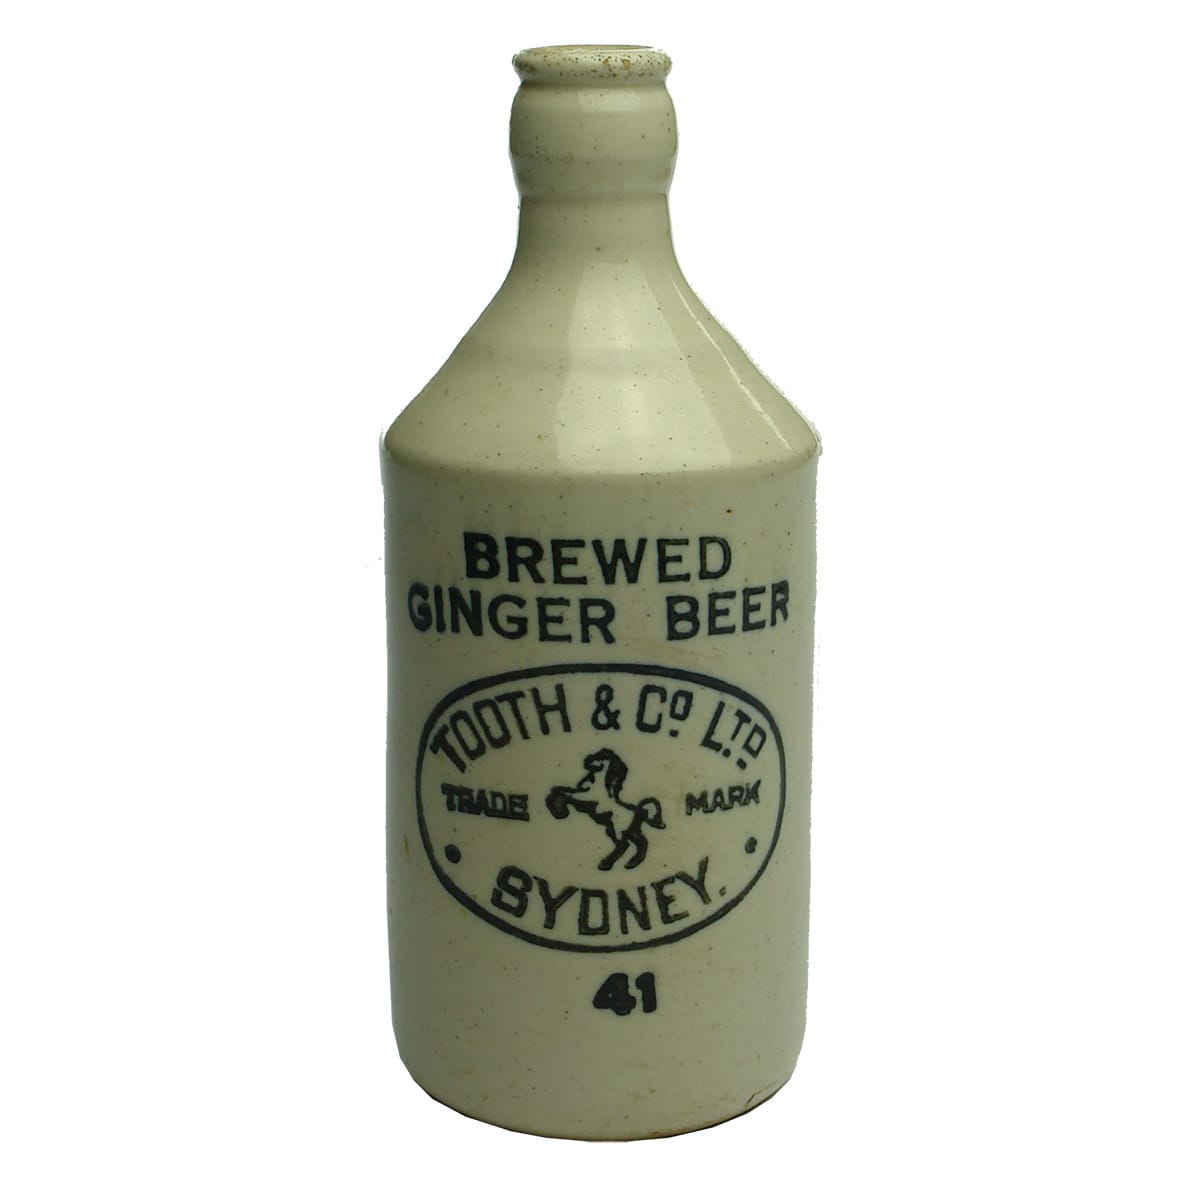 Ginger Beer. Tooth & Co Ltd Sydney. All White Crown Seal. Ridged neck. (New South Wales)